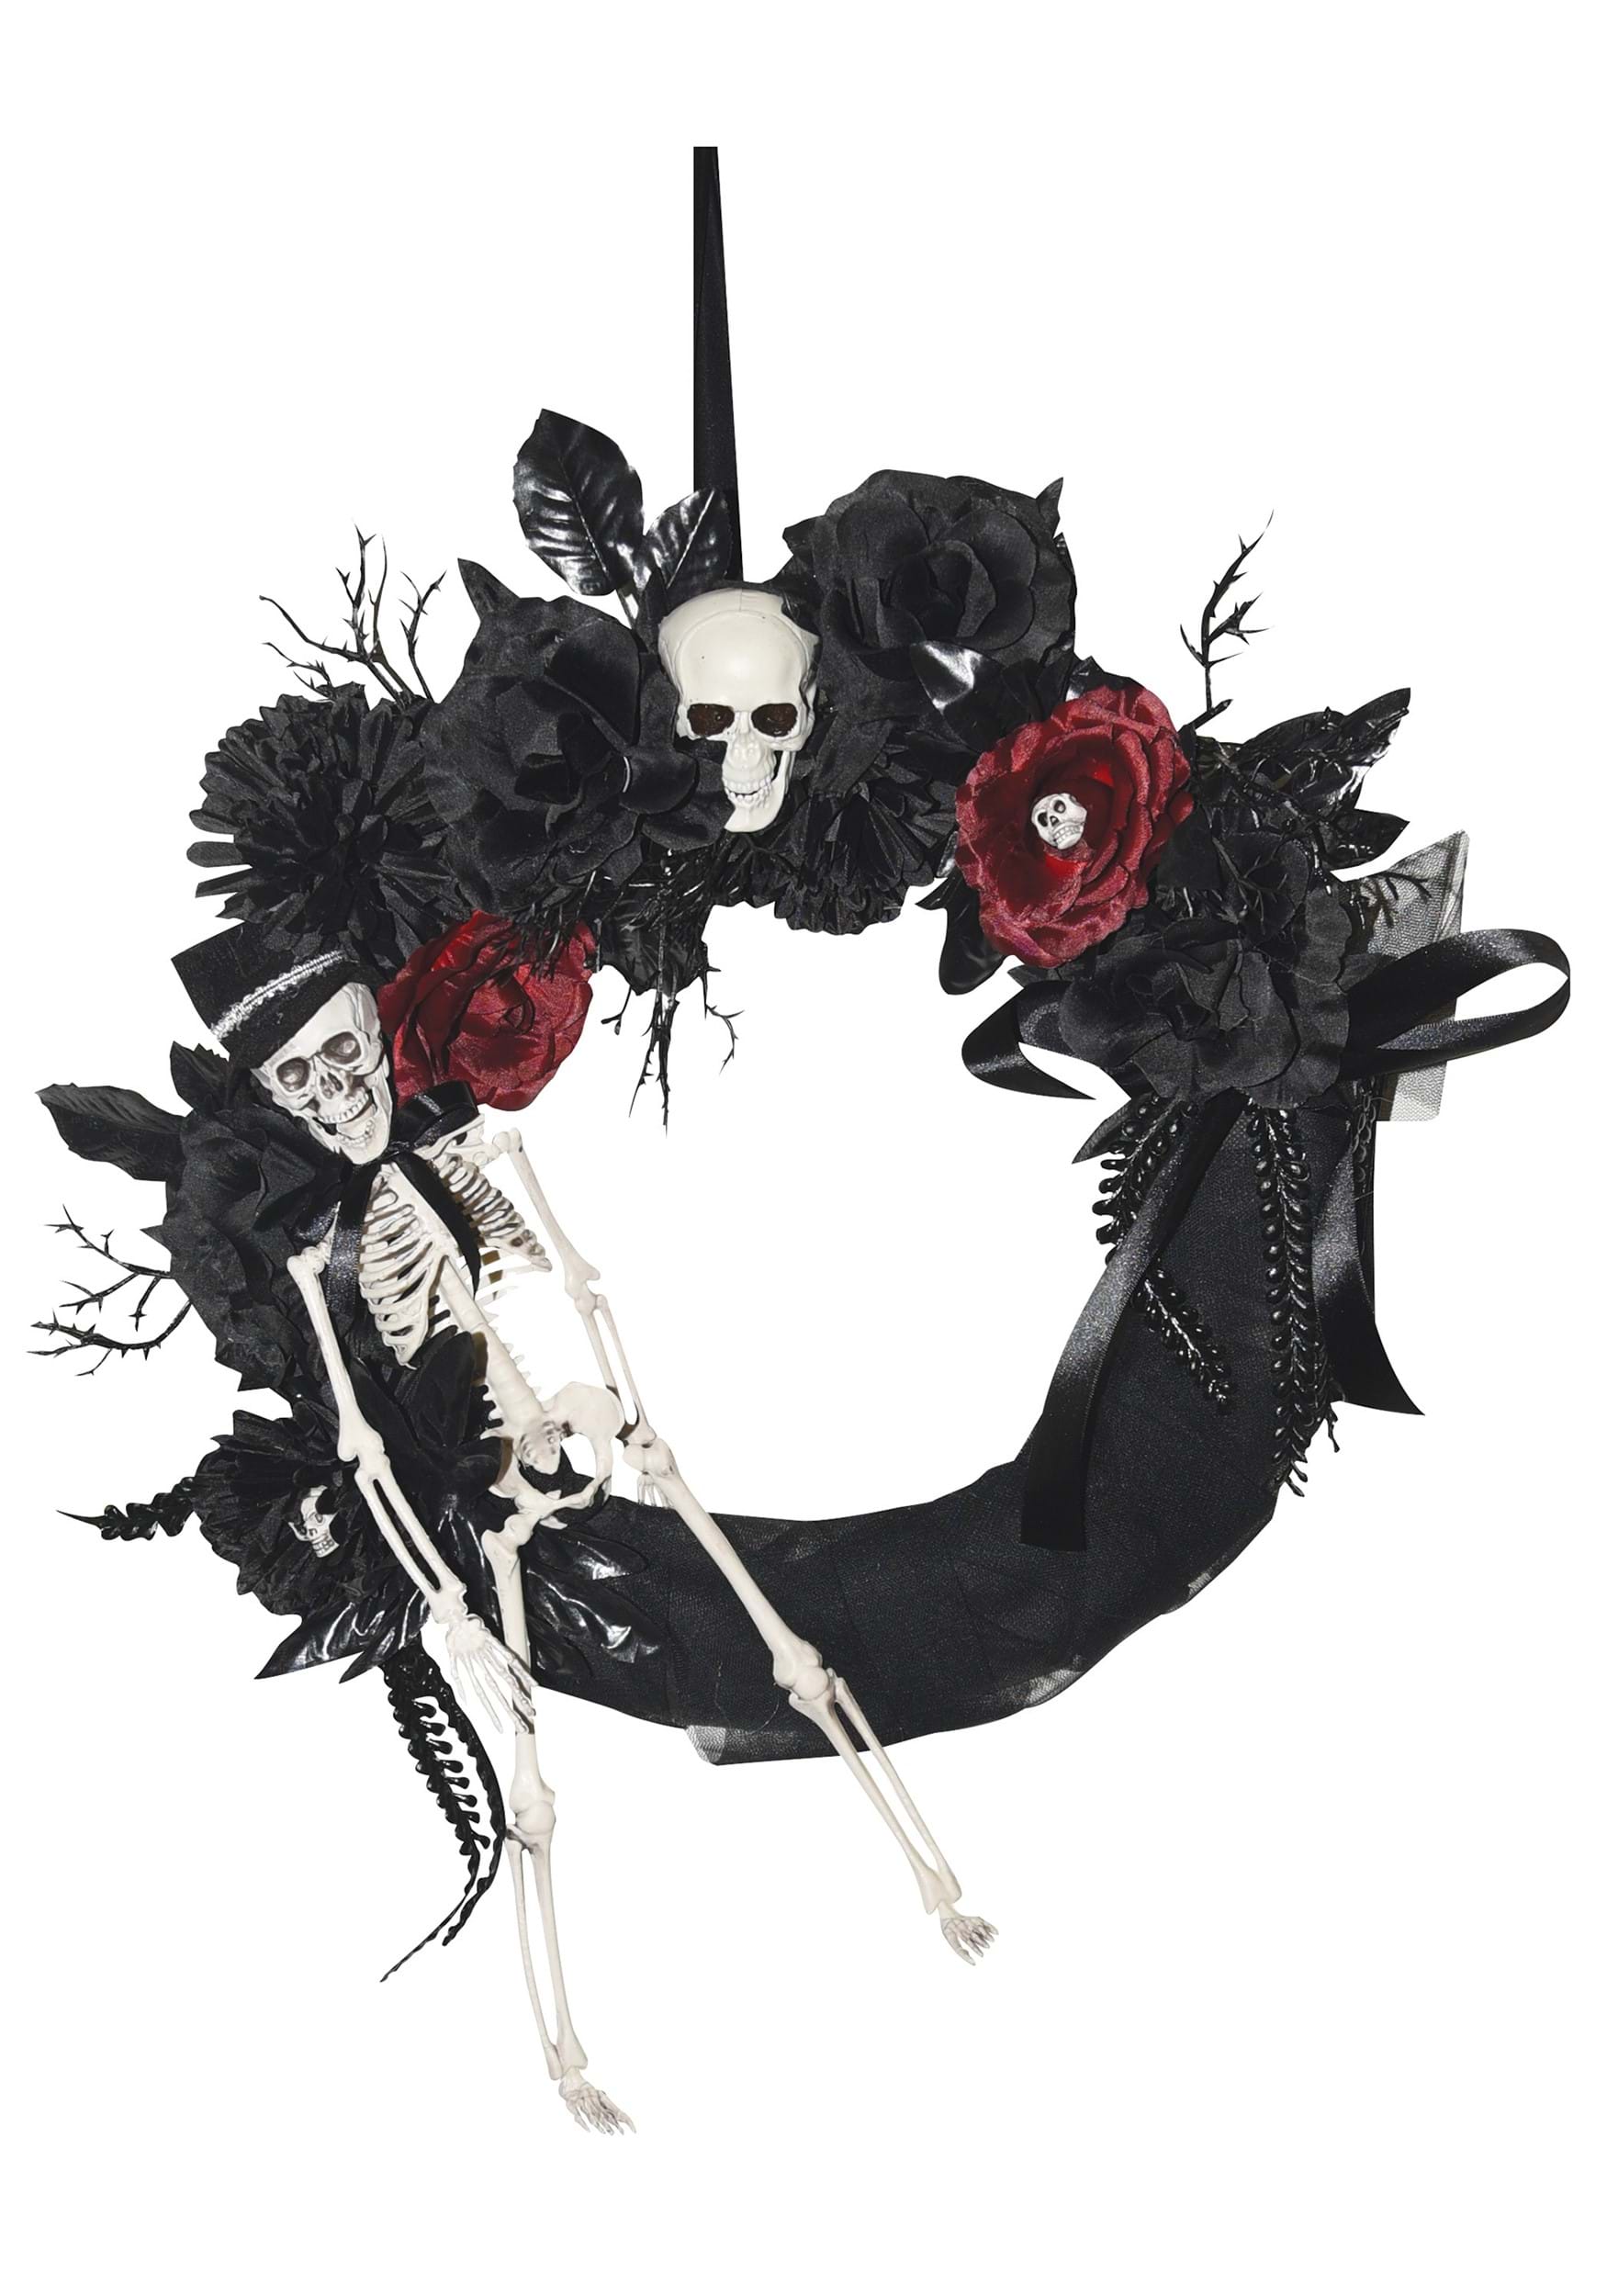 18″ Black Wreath with Skeleton and Flowers